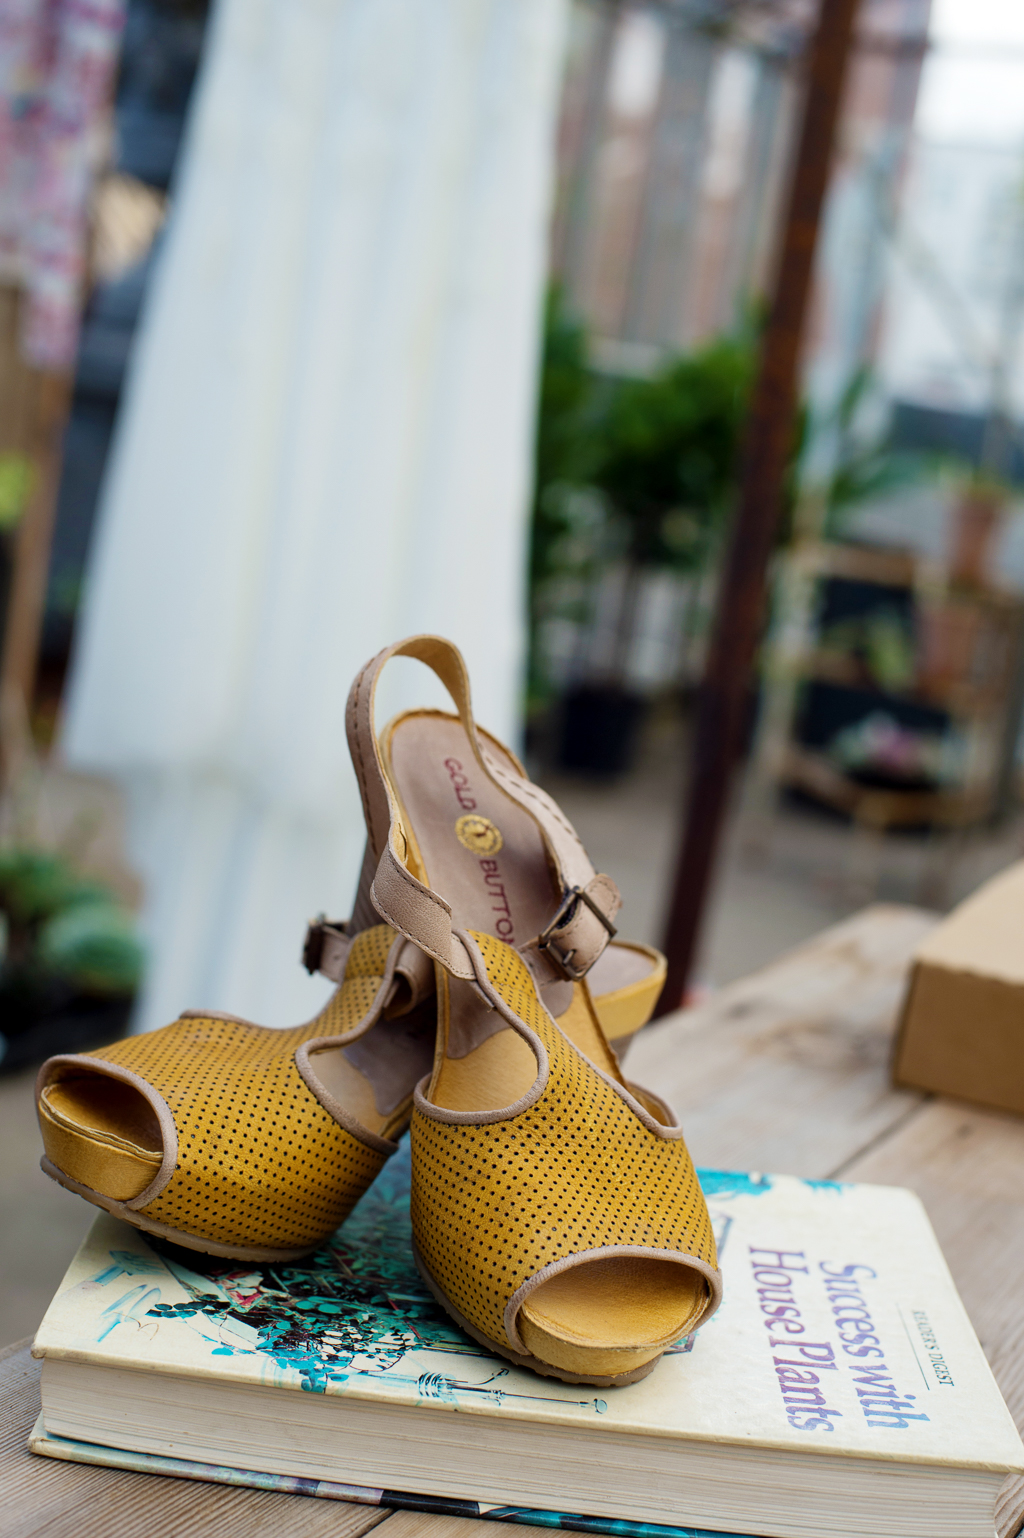 bride's vintage mustard yellow wedding shoes sit on a gardening book with her dress in the background